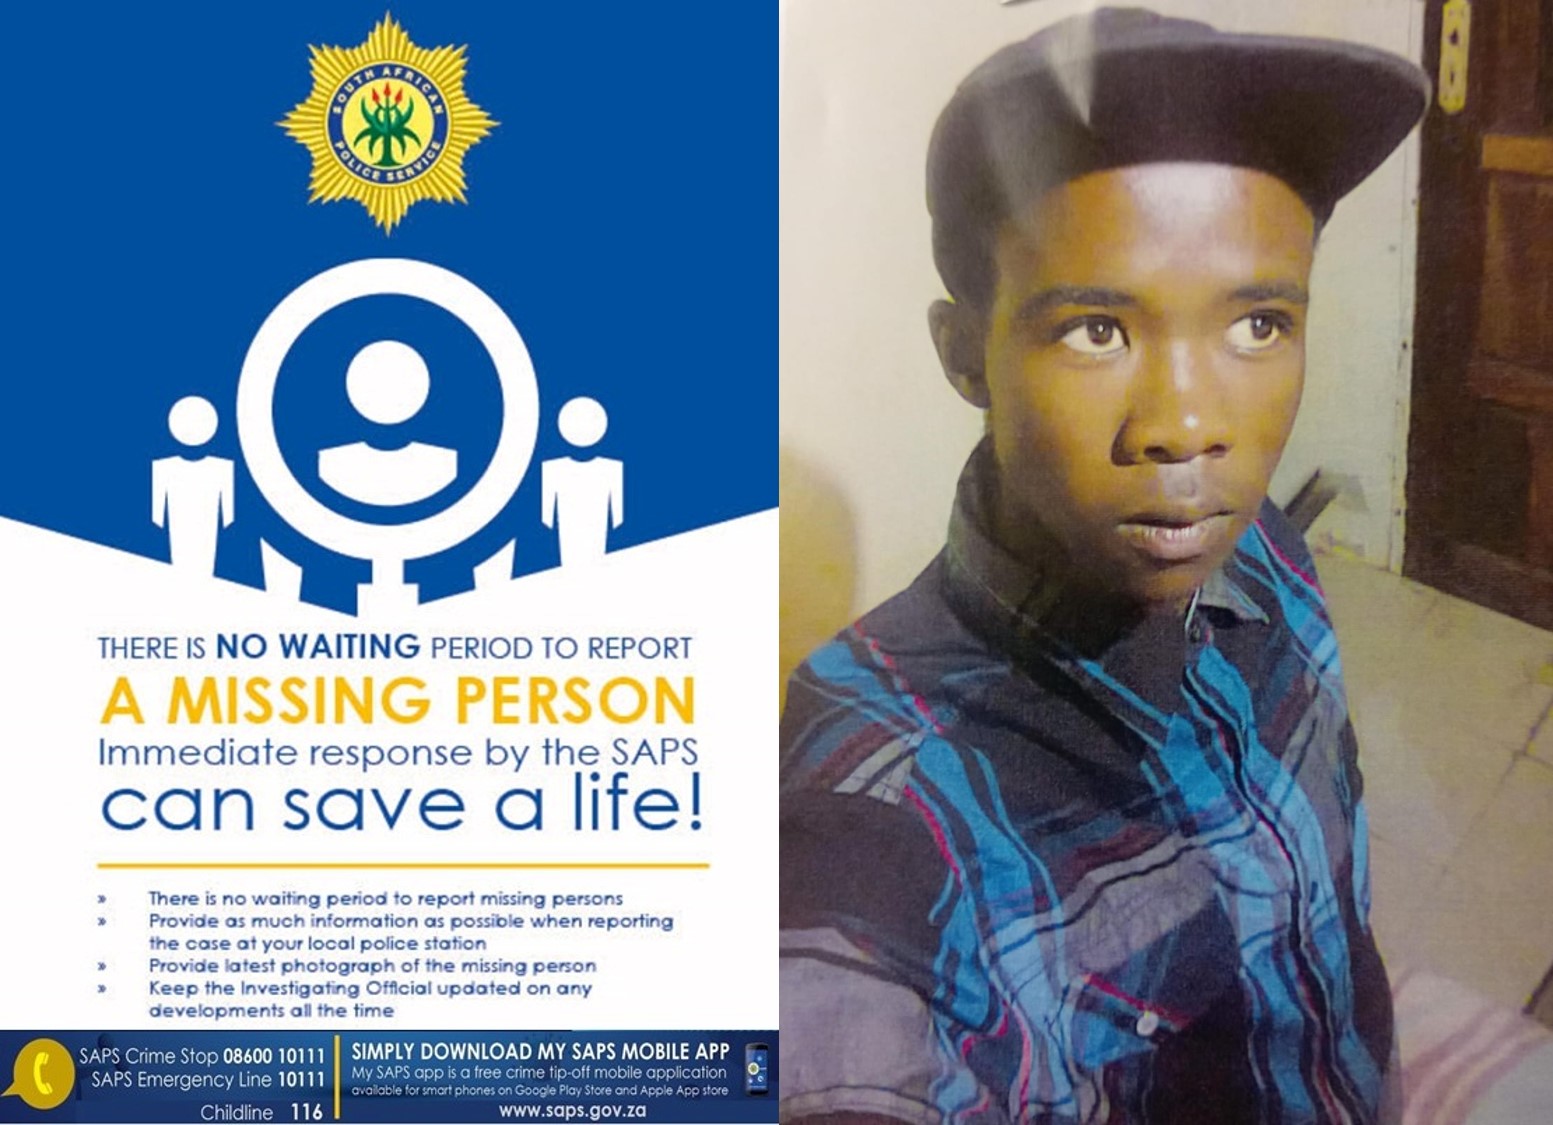 Thabong SAPS seek help in finding Mahloane Chaka who is still missing